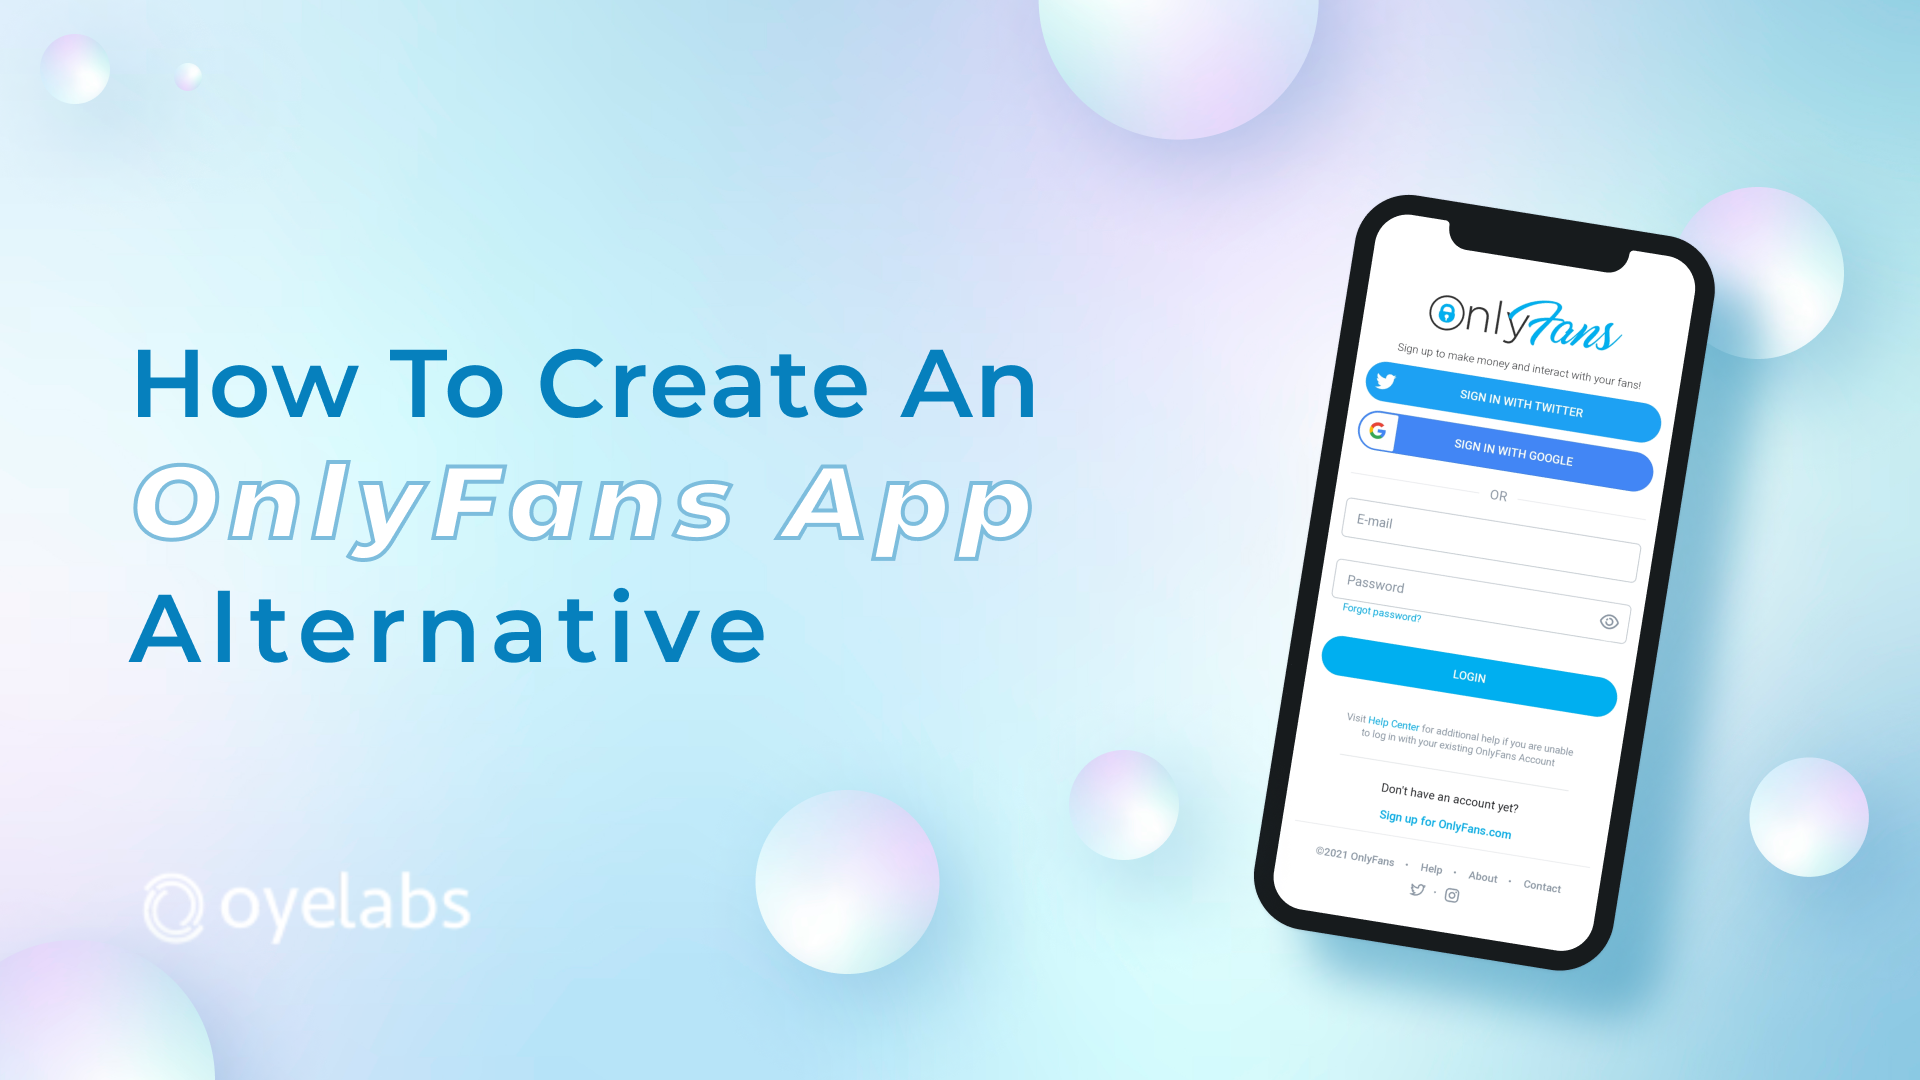 How to save videos from onlyfans iphone